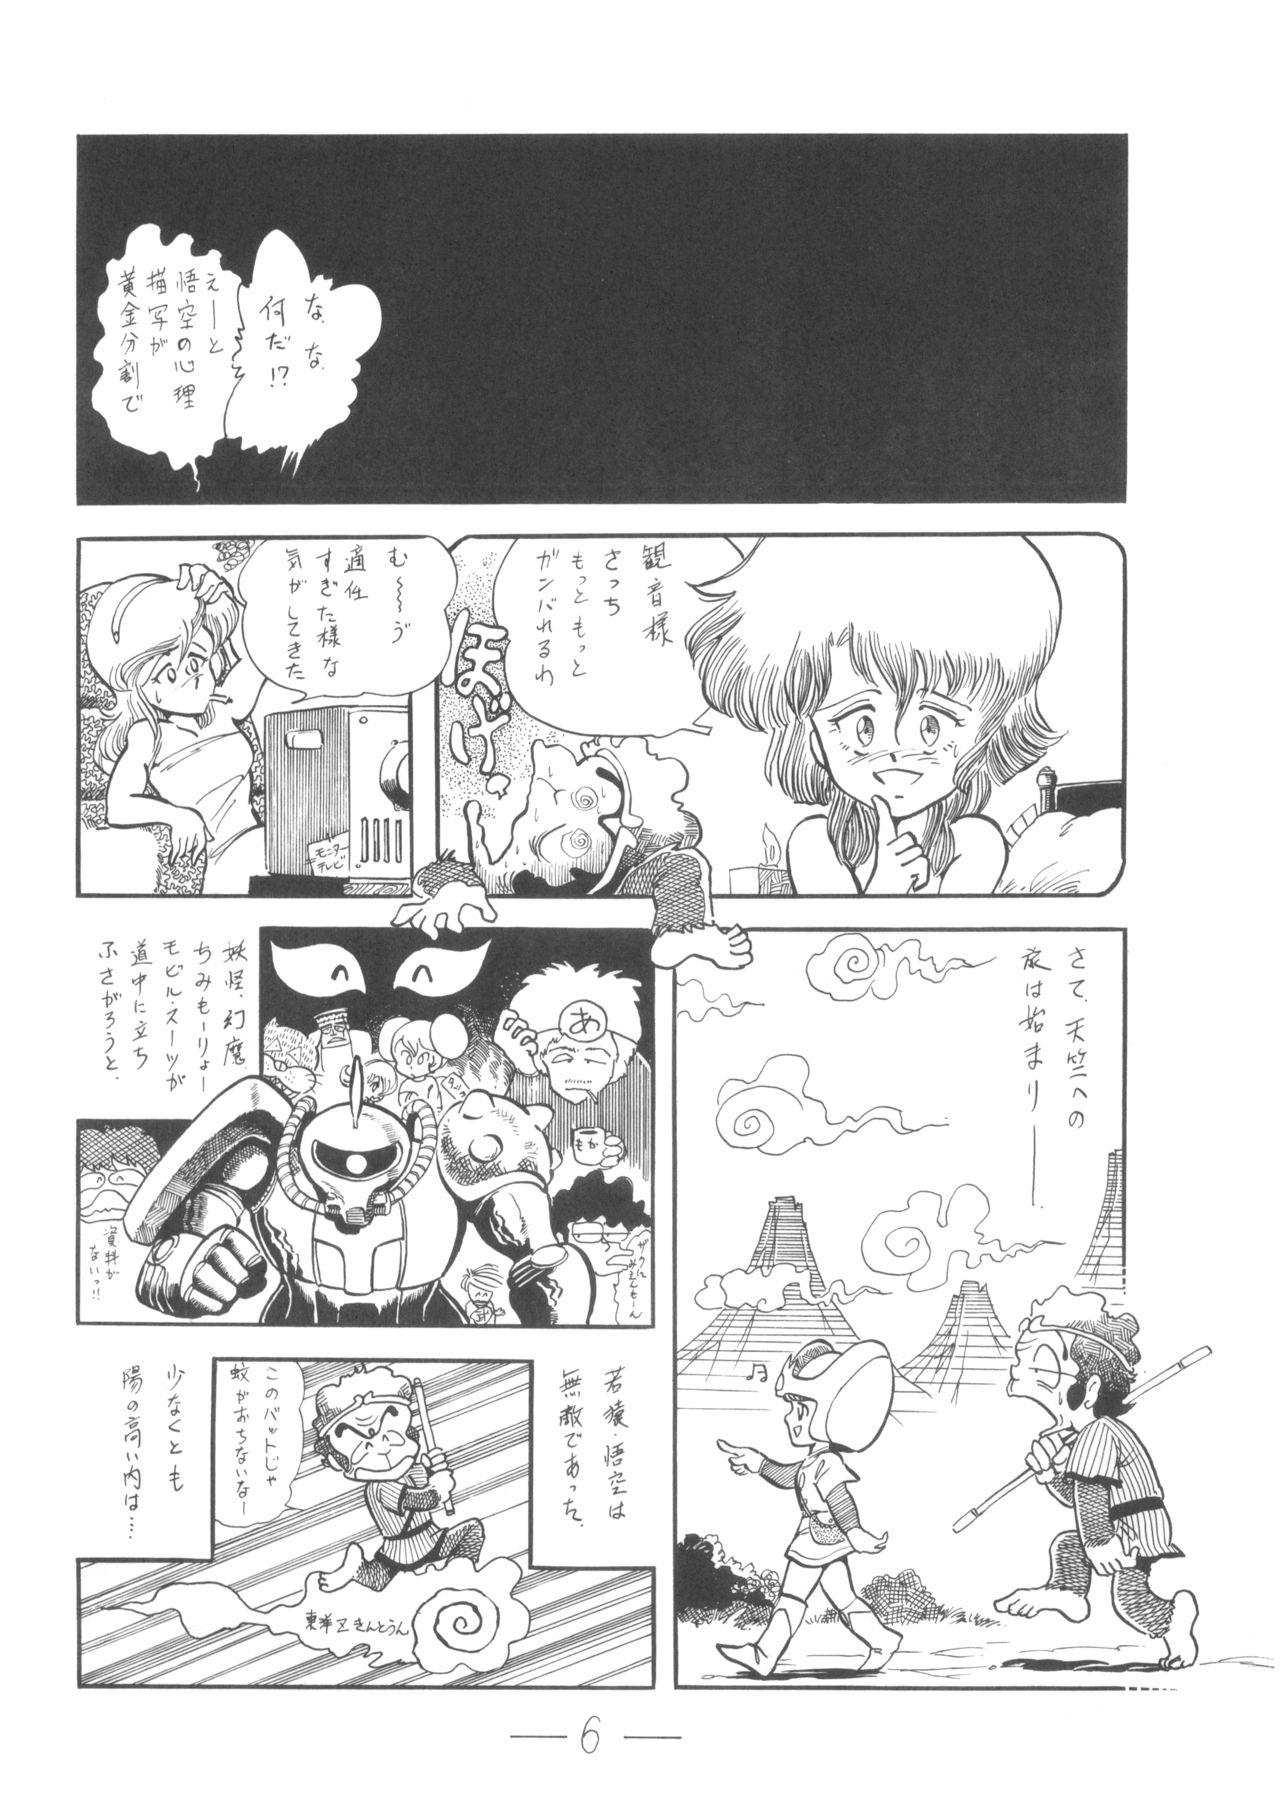 Tiny Tits Cybele Vol.6 - Dirty pair Journey to the west Fat - Page 7